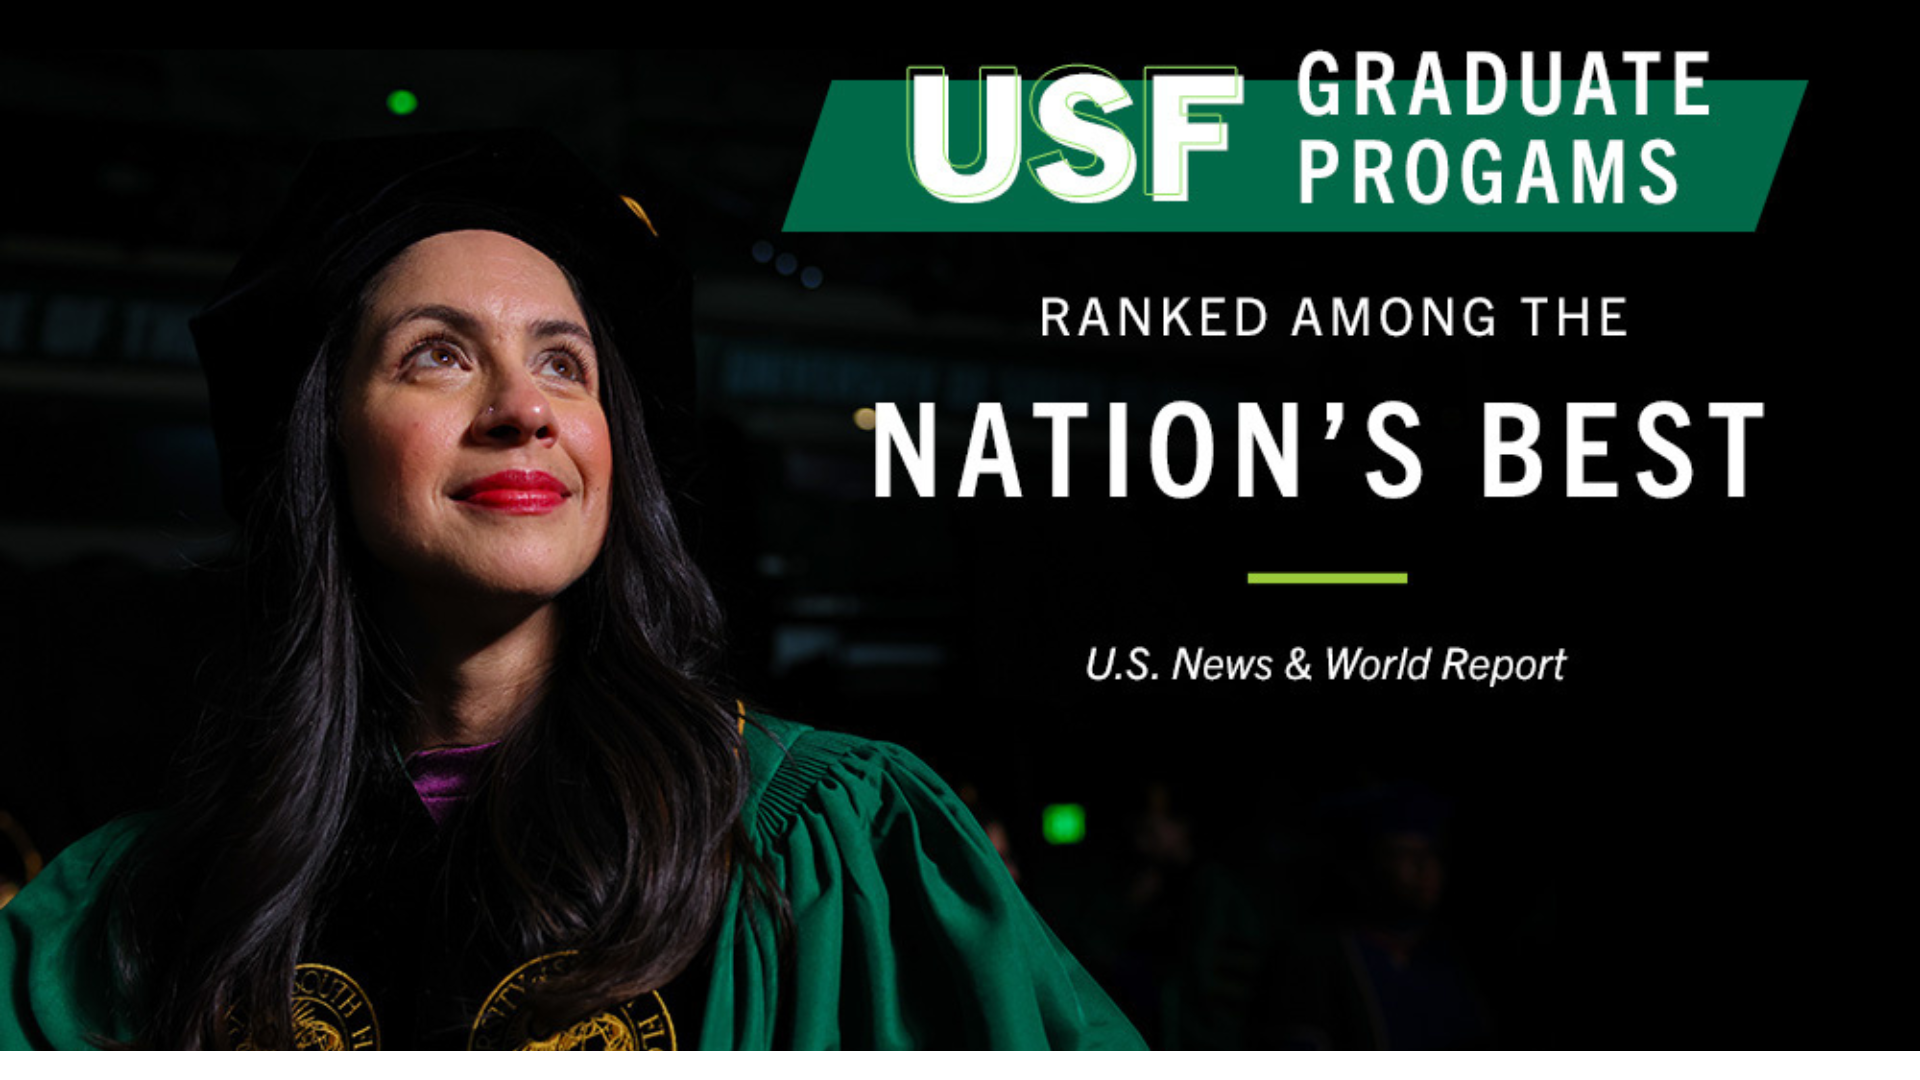 USF graduate programs ranked among the nation's best - U.S. News & World Report